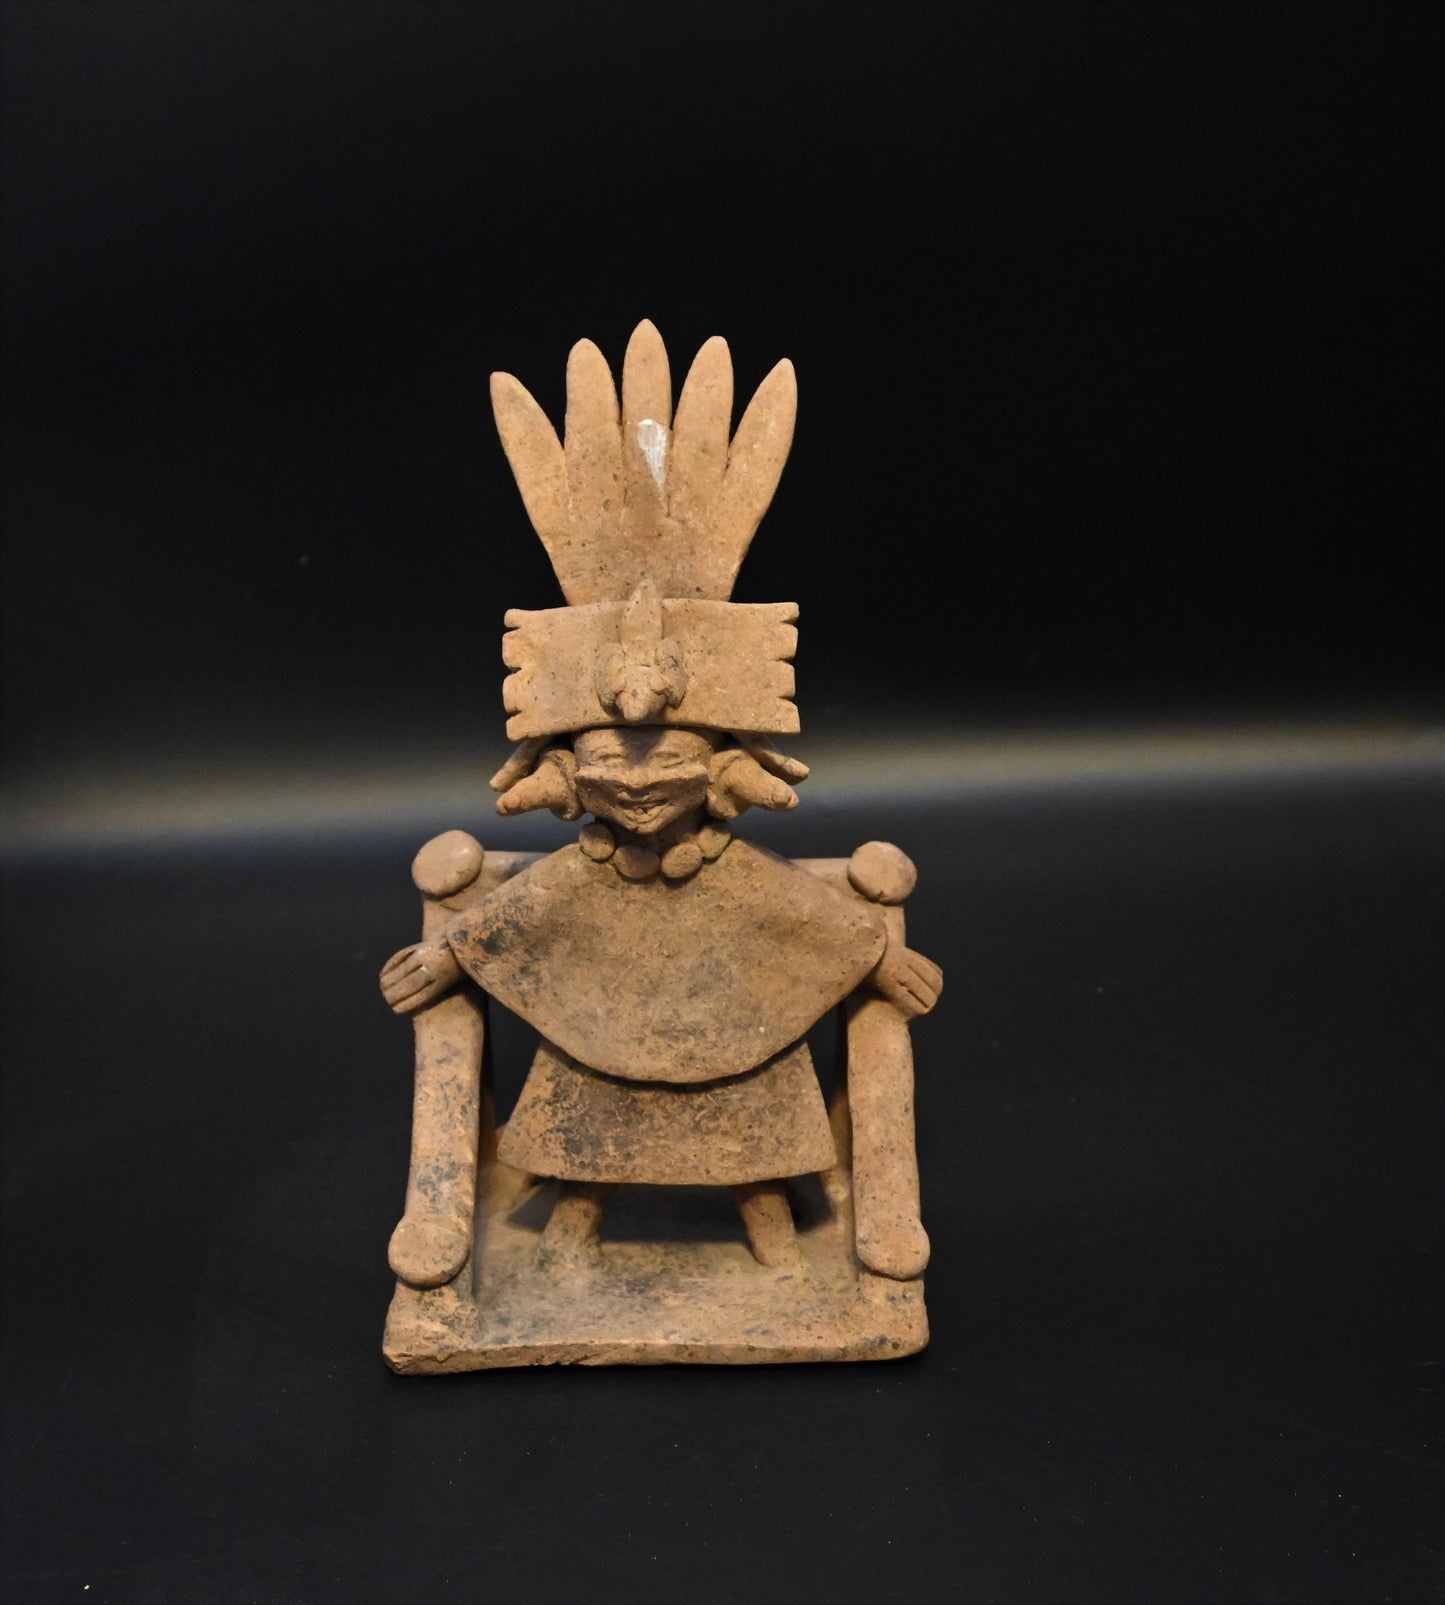 Authentic Pre-Columbian Veracruz Artifact ca. 400 to 700 CE Shaman or Priest on Platform with Provenance & Certificate of Authenticity